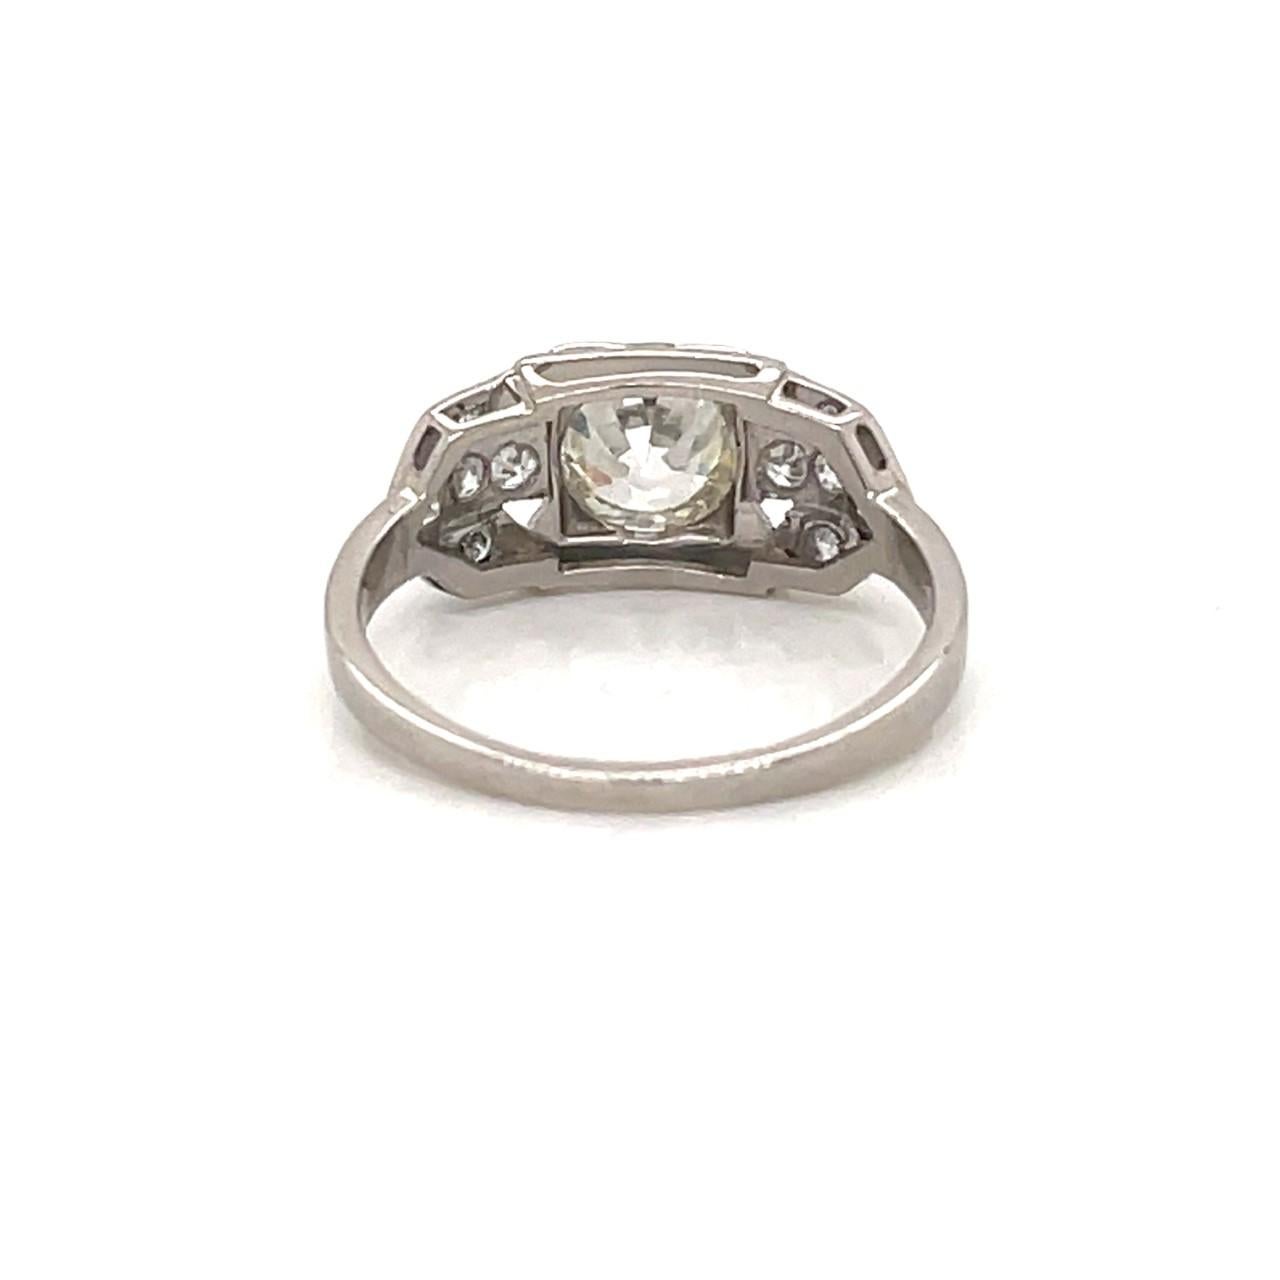 1.11tcw Old European Diamond Engagement Ring in Platinum Setting In Good Condition For Sale In Newport Beach, CA